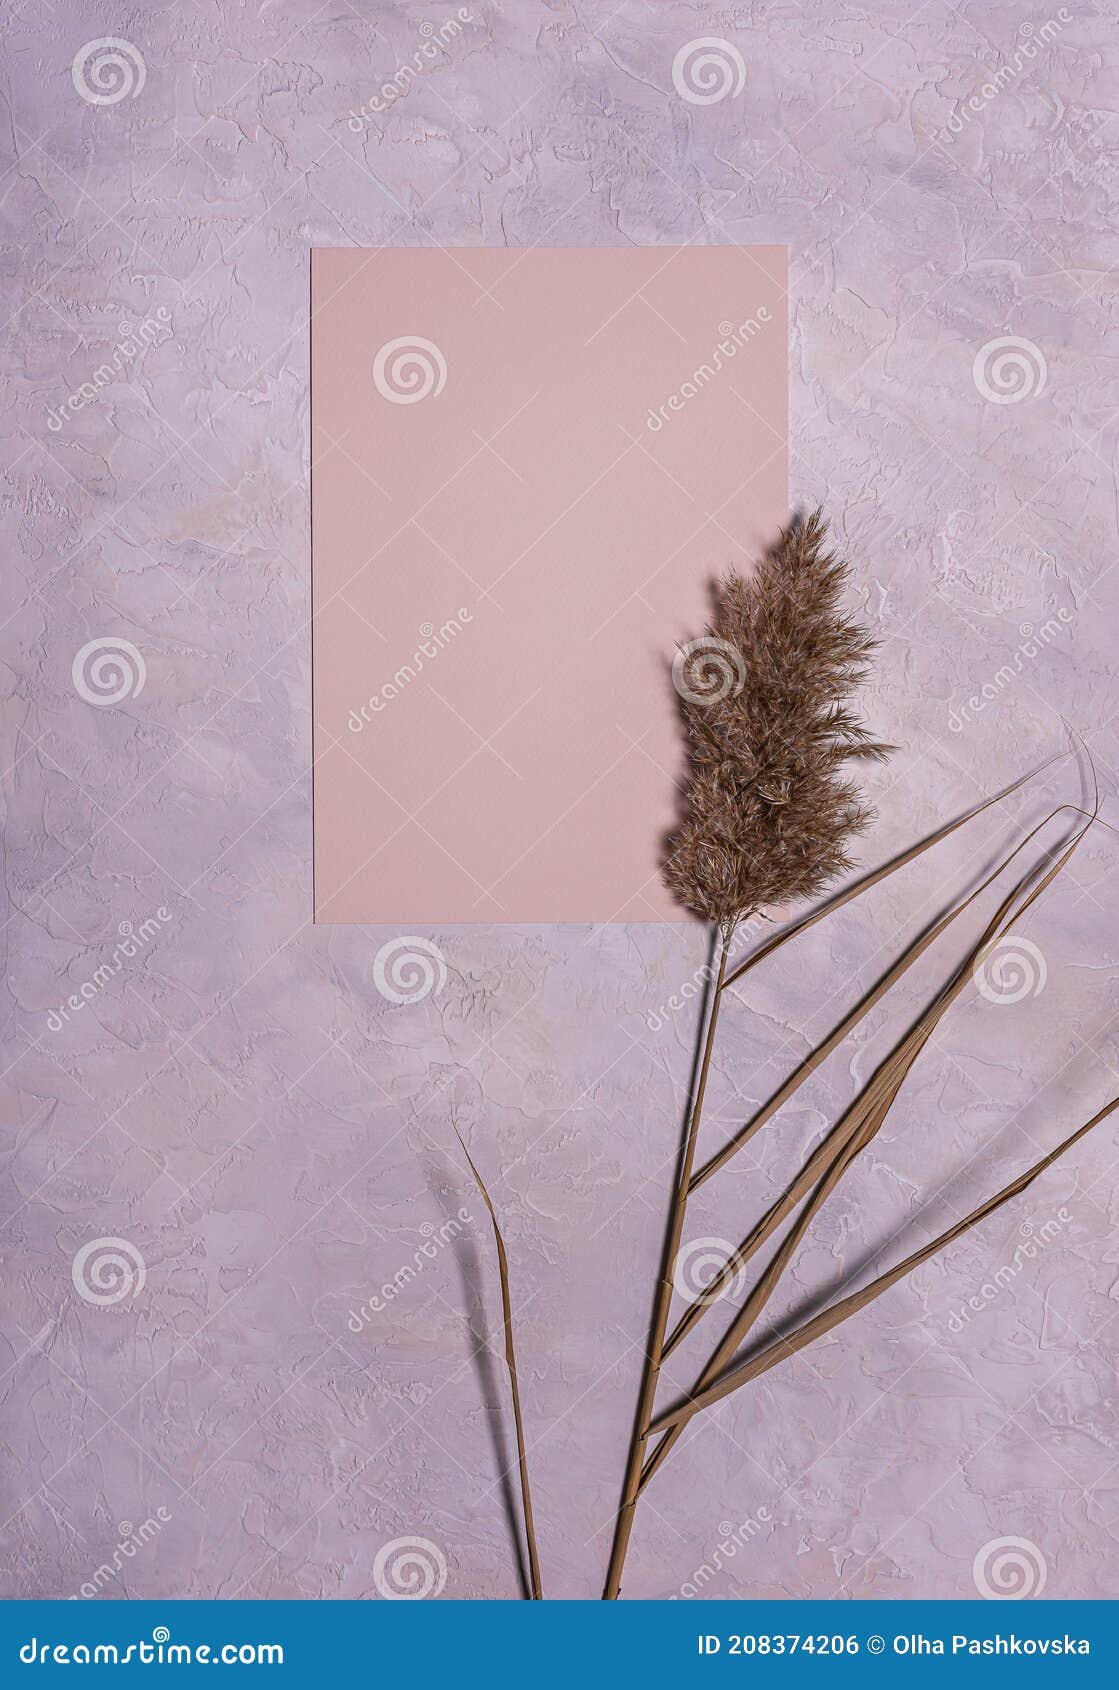 Dried Reed Flower and Peach Colored Paper on Dusk Concrete Stock